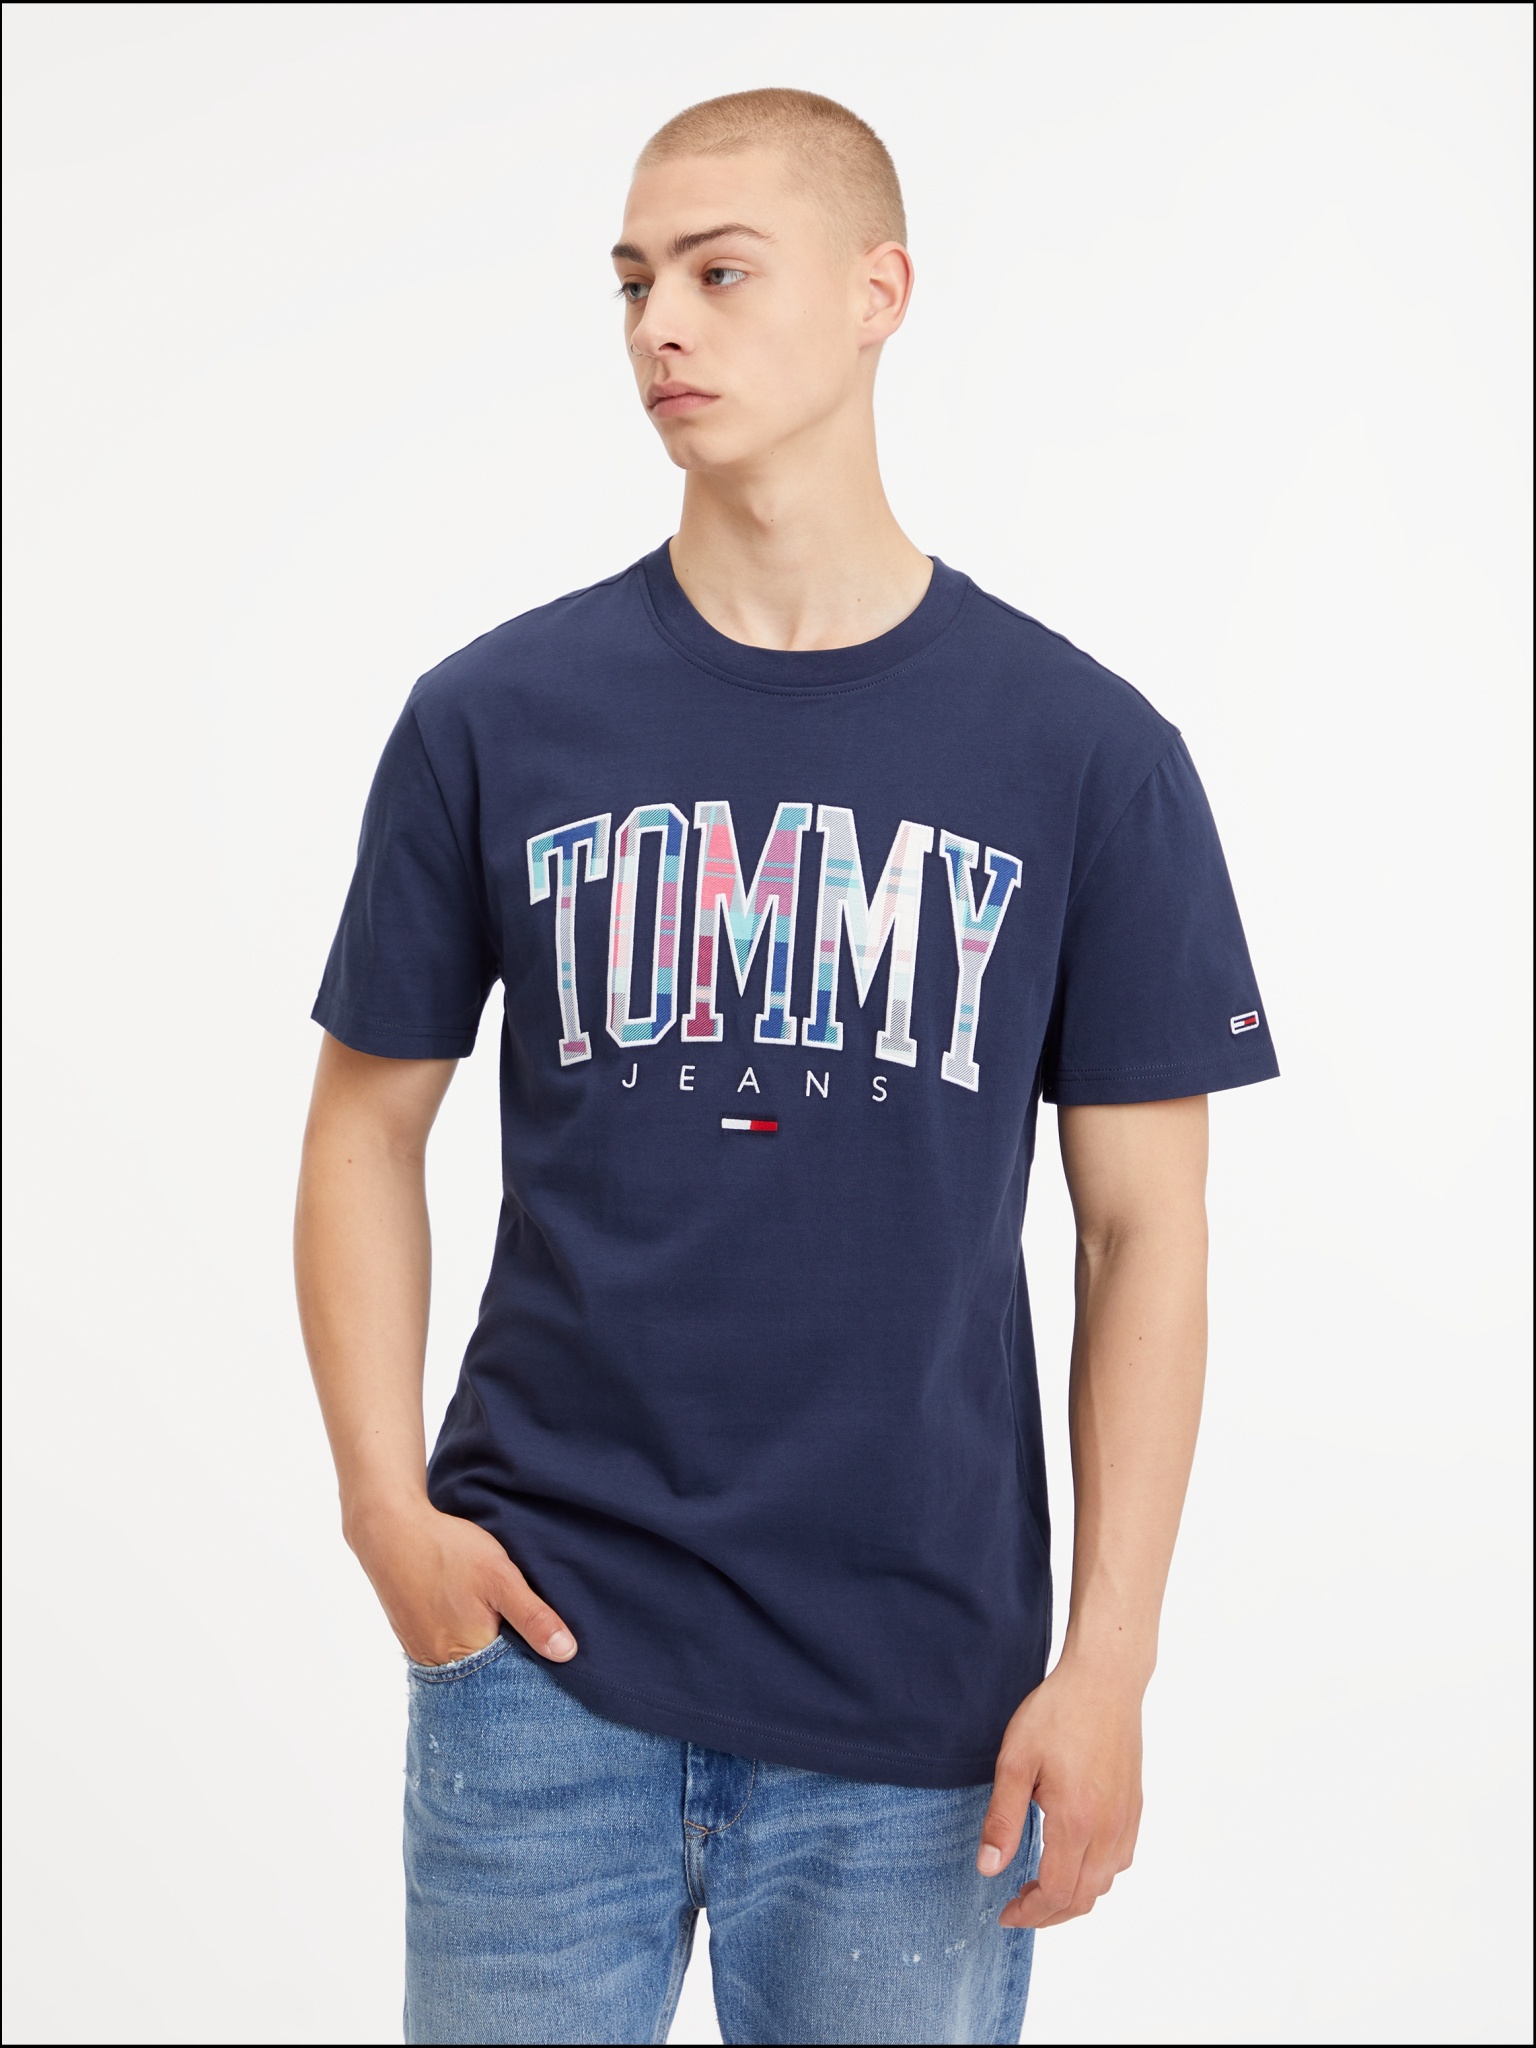 TOMMY JEANS CLASSIC FIT T-SHIRT MIT SCHOTTENKARO-LOGO 10675420